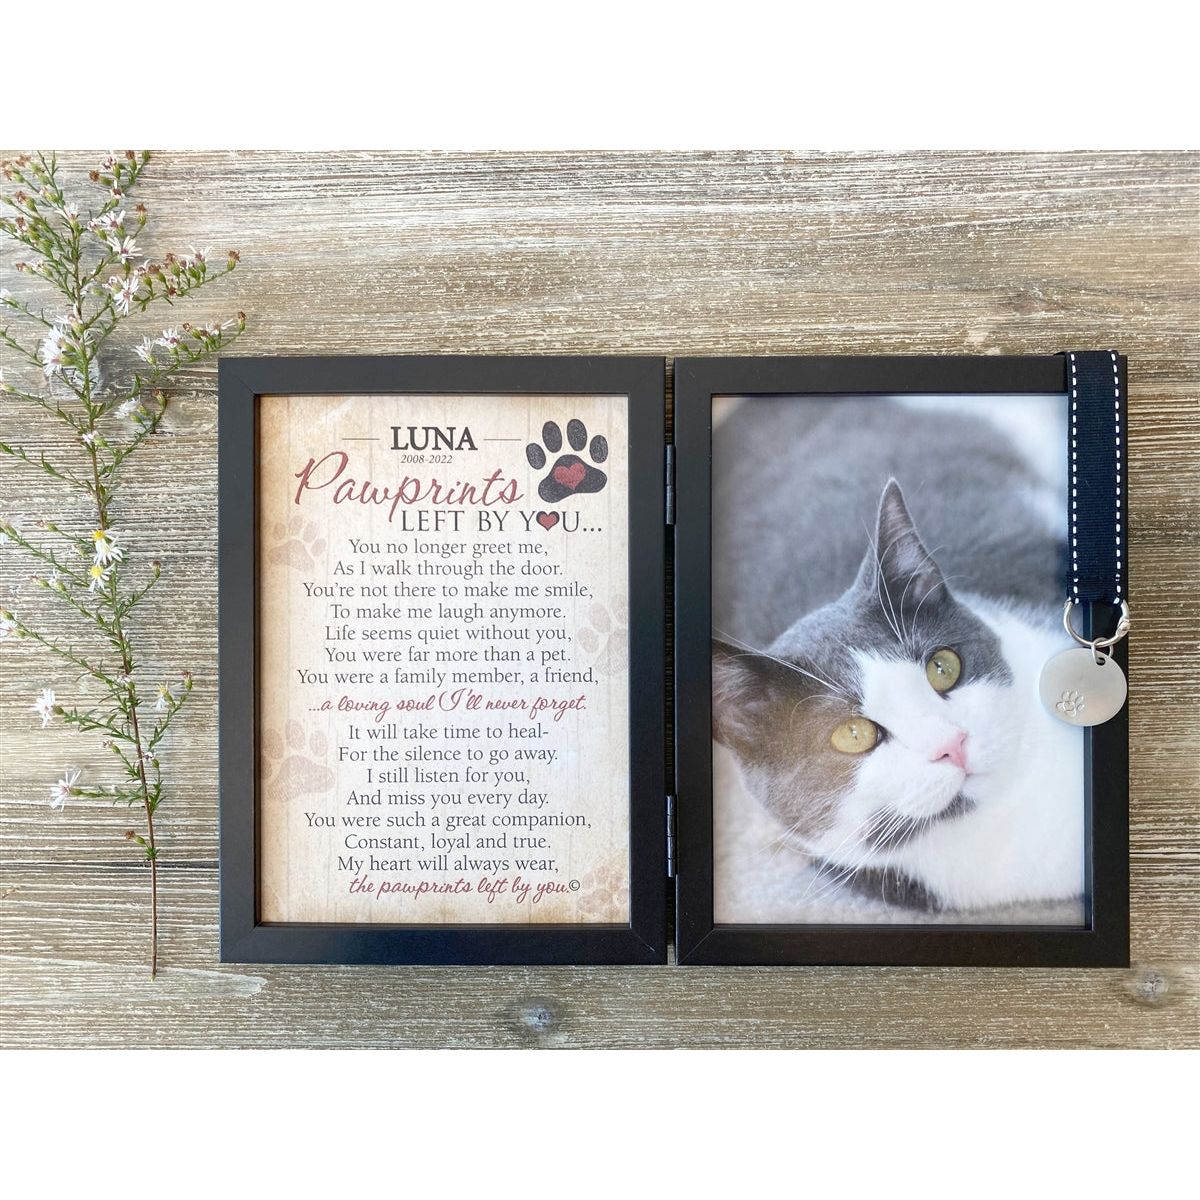 Personalized Pawprints Pet Loss Memorial Frame: Pawprints Left by You Cat